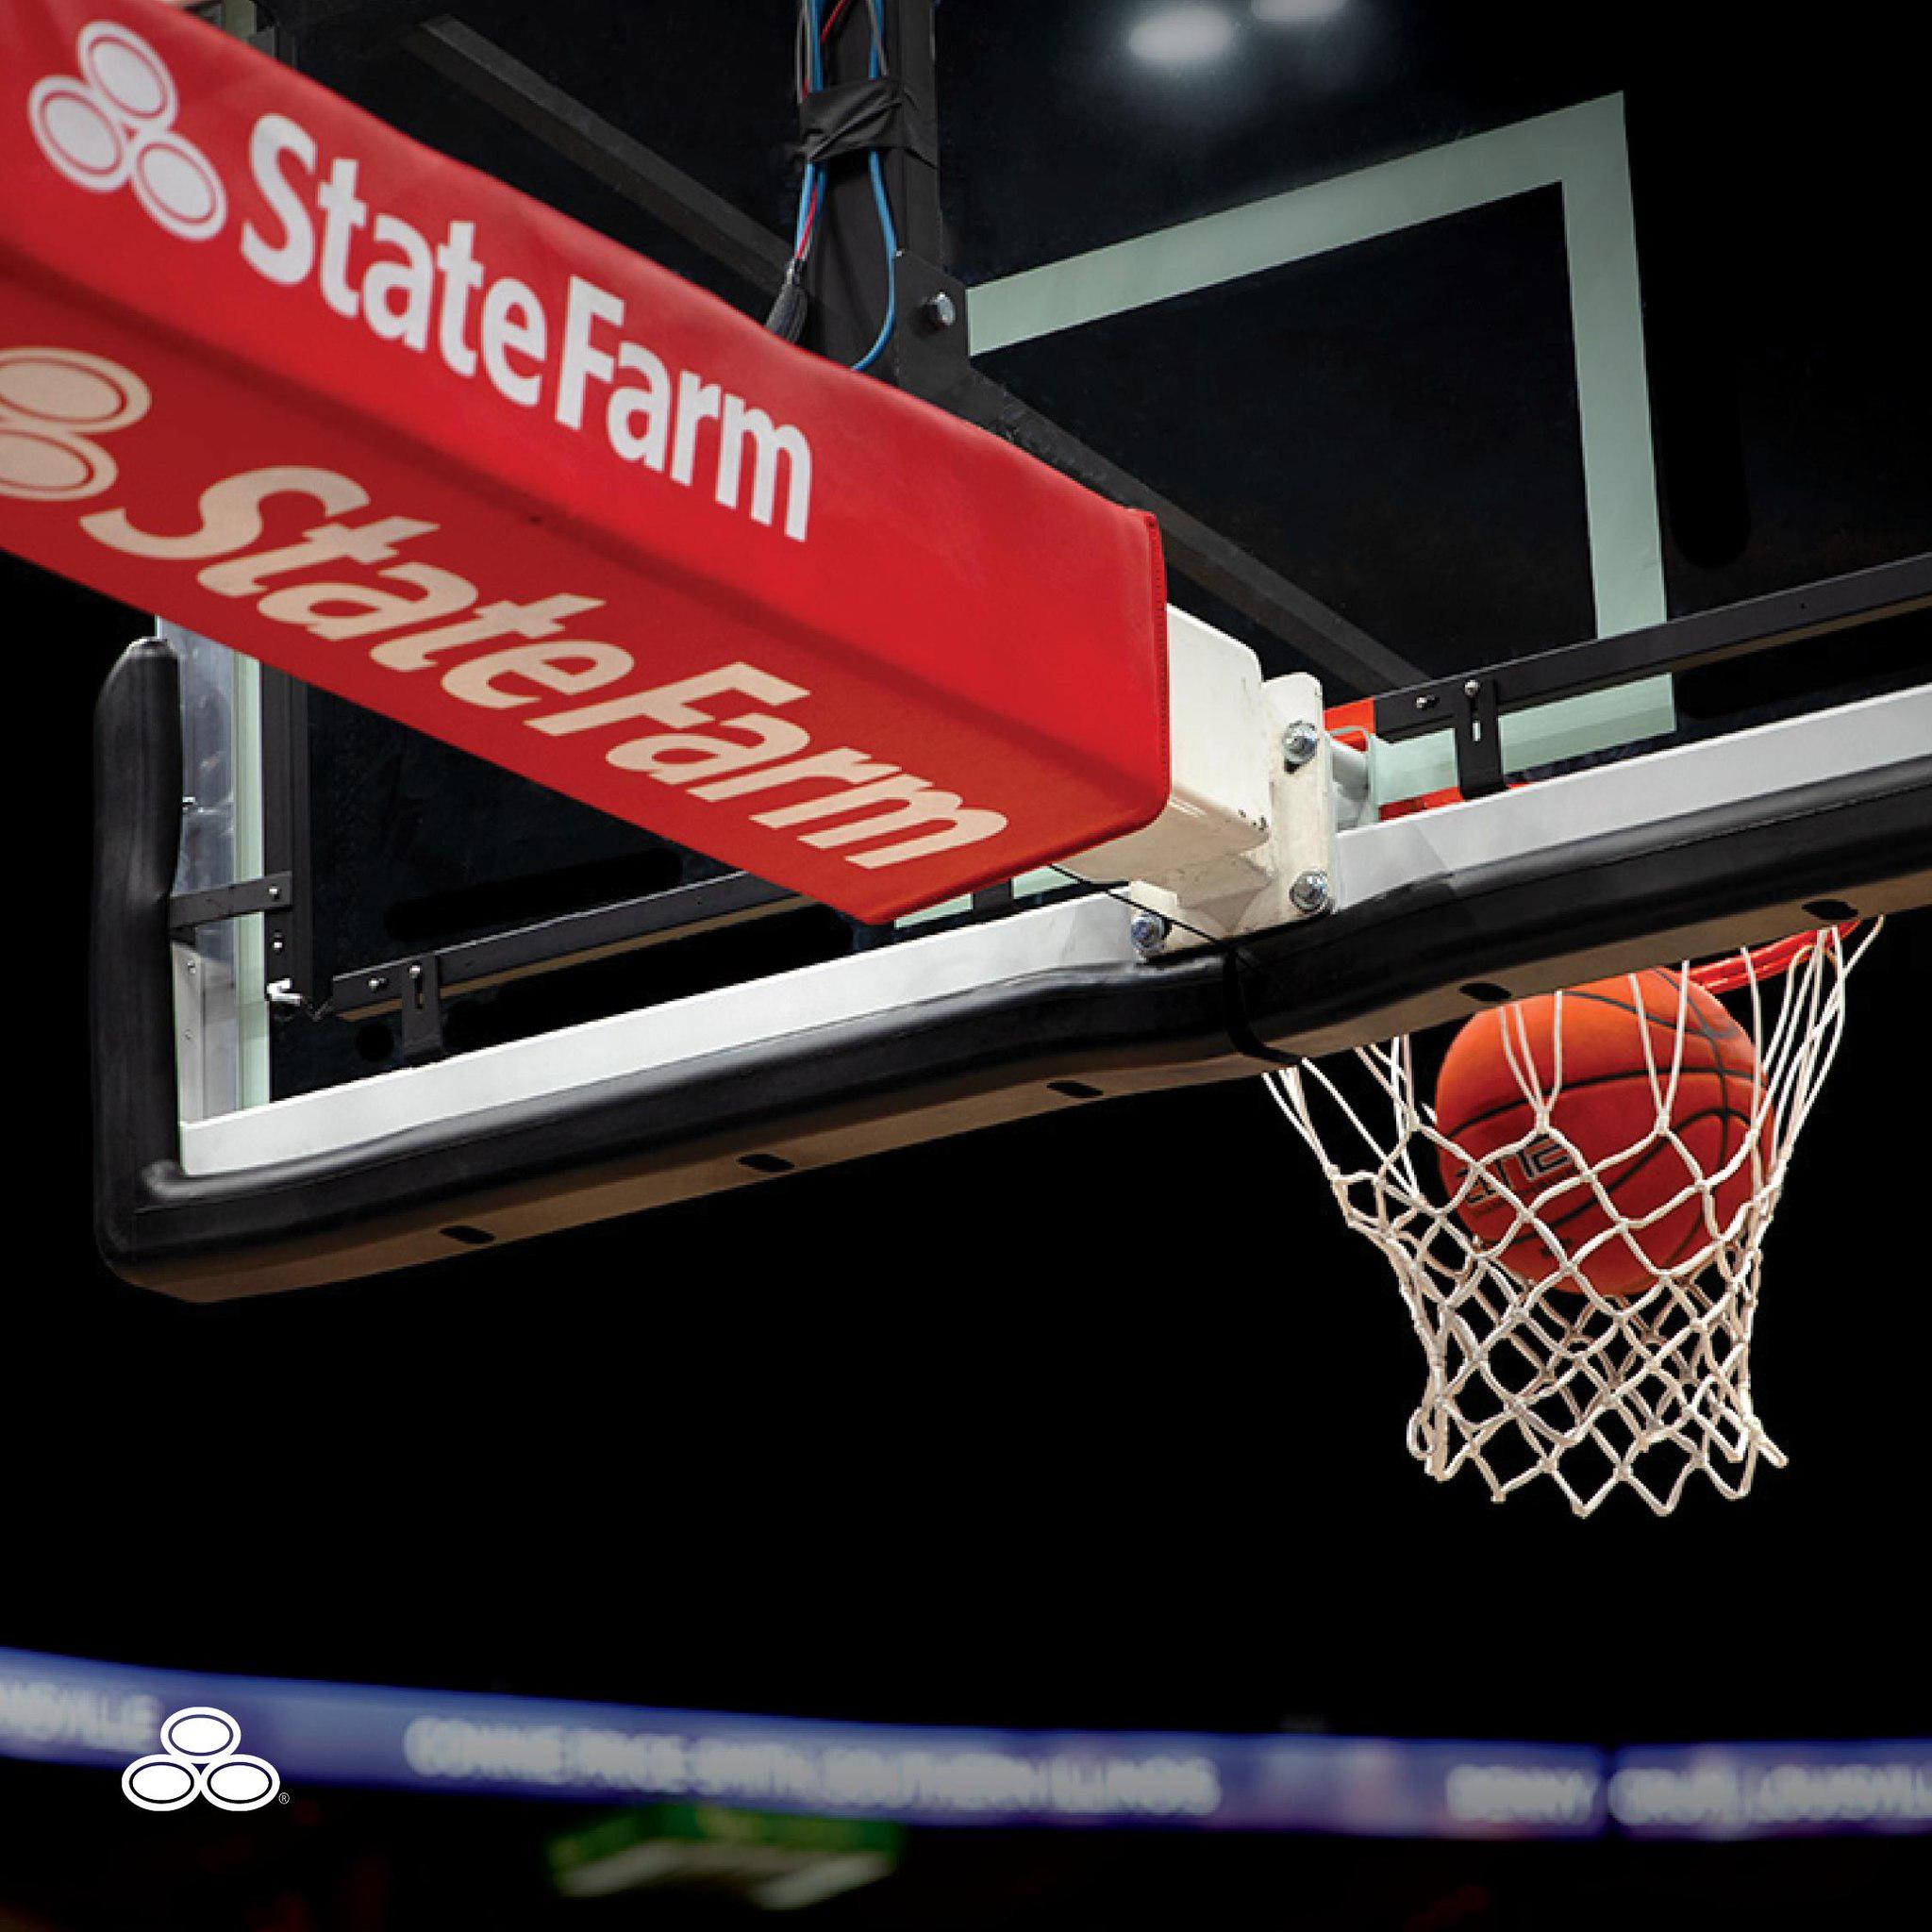 The competition on the court is getting fierce! Are your teams still in the mix? Regina Talbot - State Farm Insurance Agent Monrovia (626)357-3401